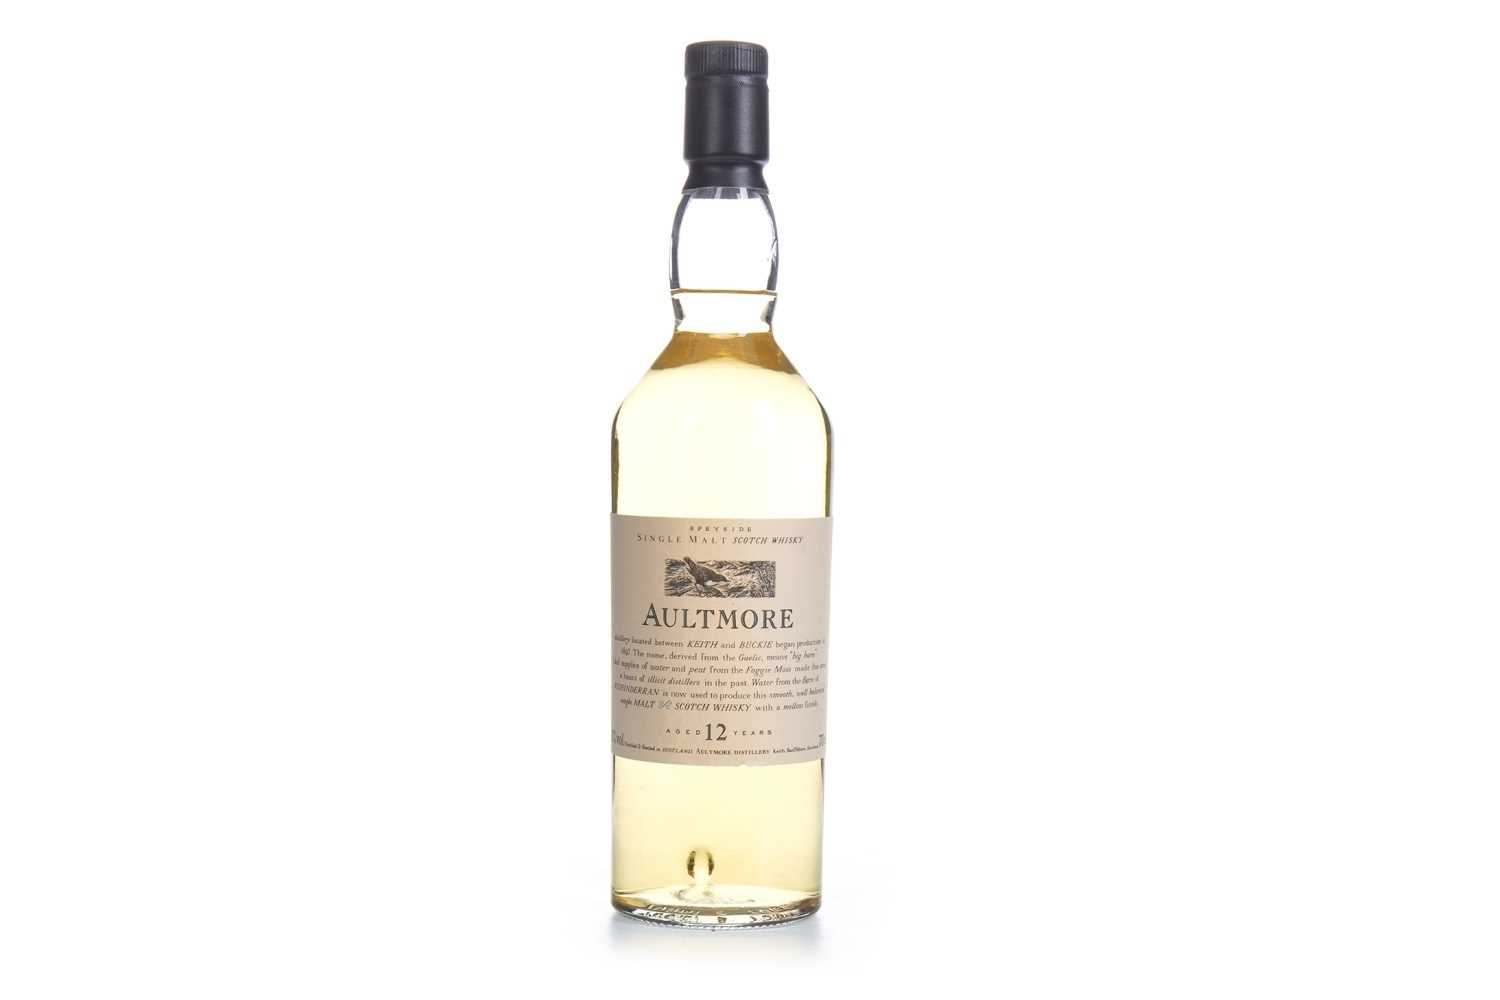 Lot 36 - AULTMORE AGED 12 YEARS FLORA & FAUNA